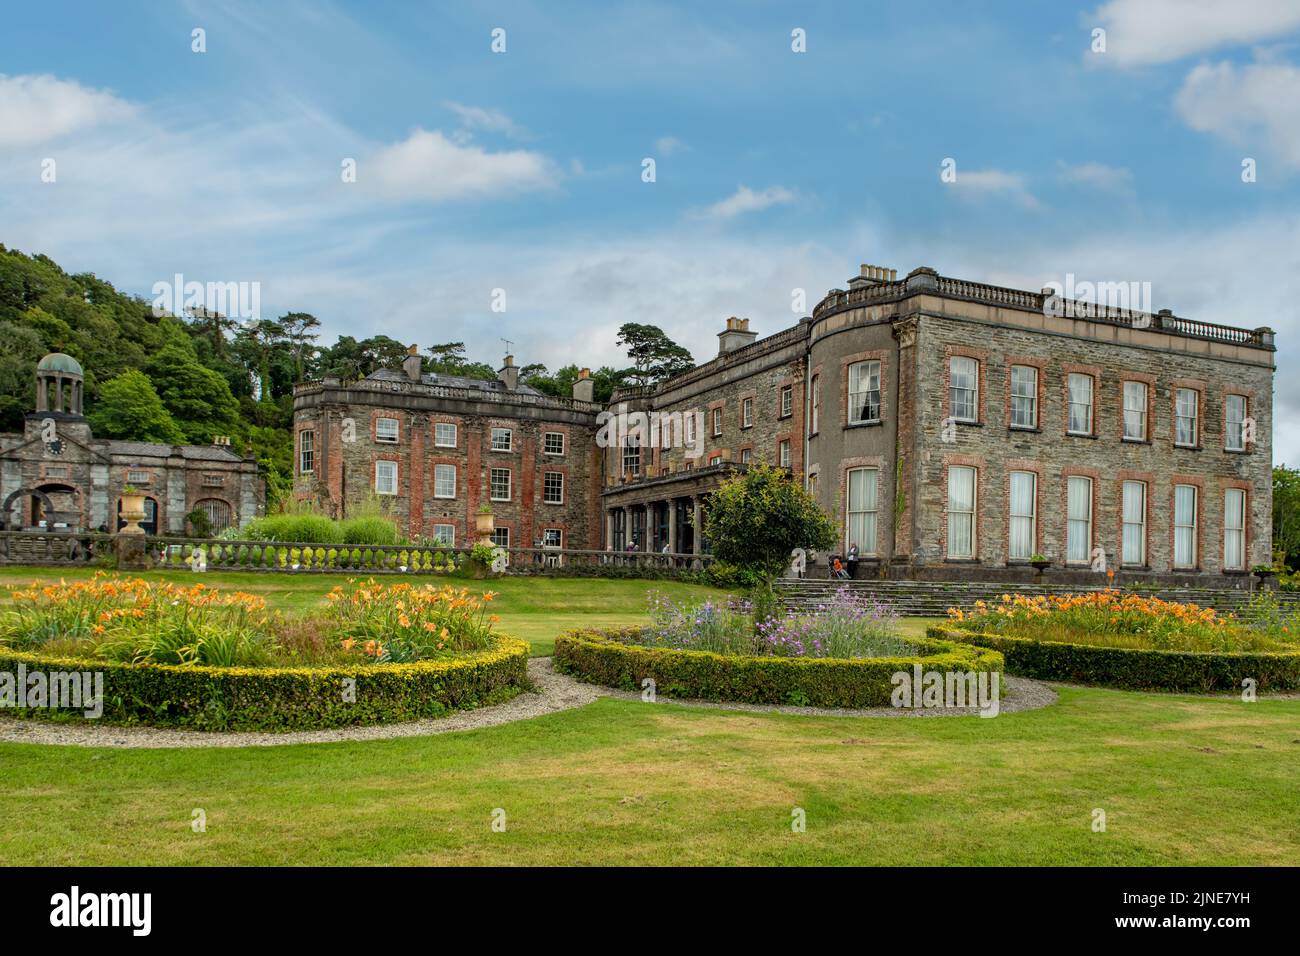 Bantry House and Gardens, Bantry, Co. Cork, Irlande Banque D'Images